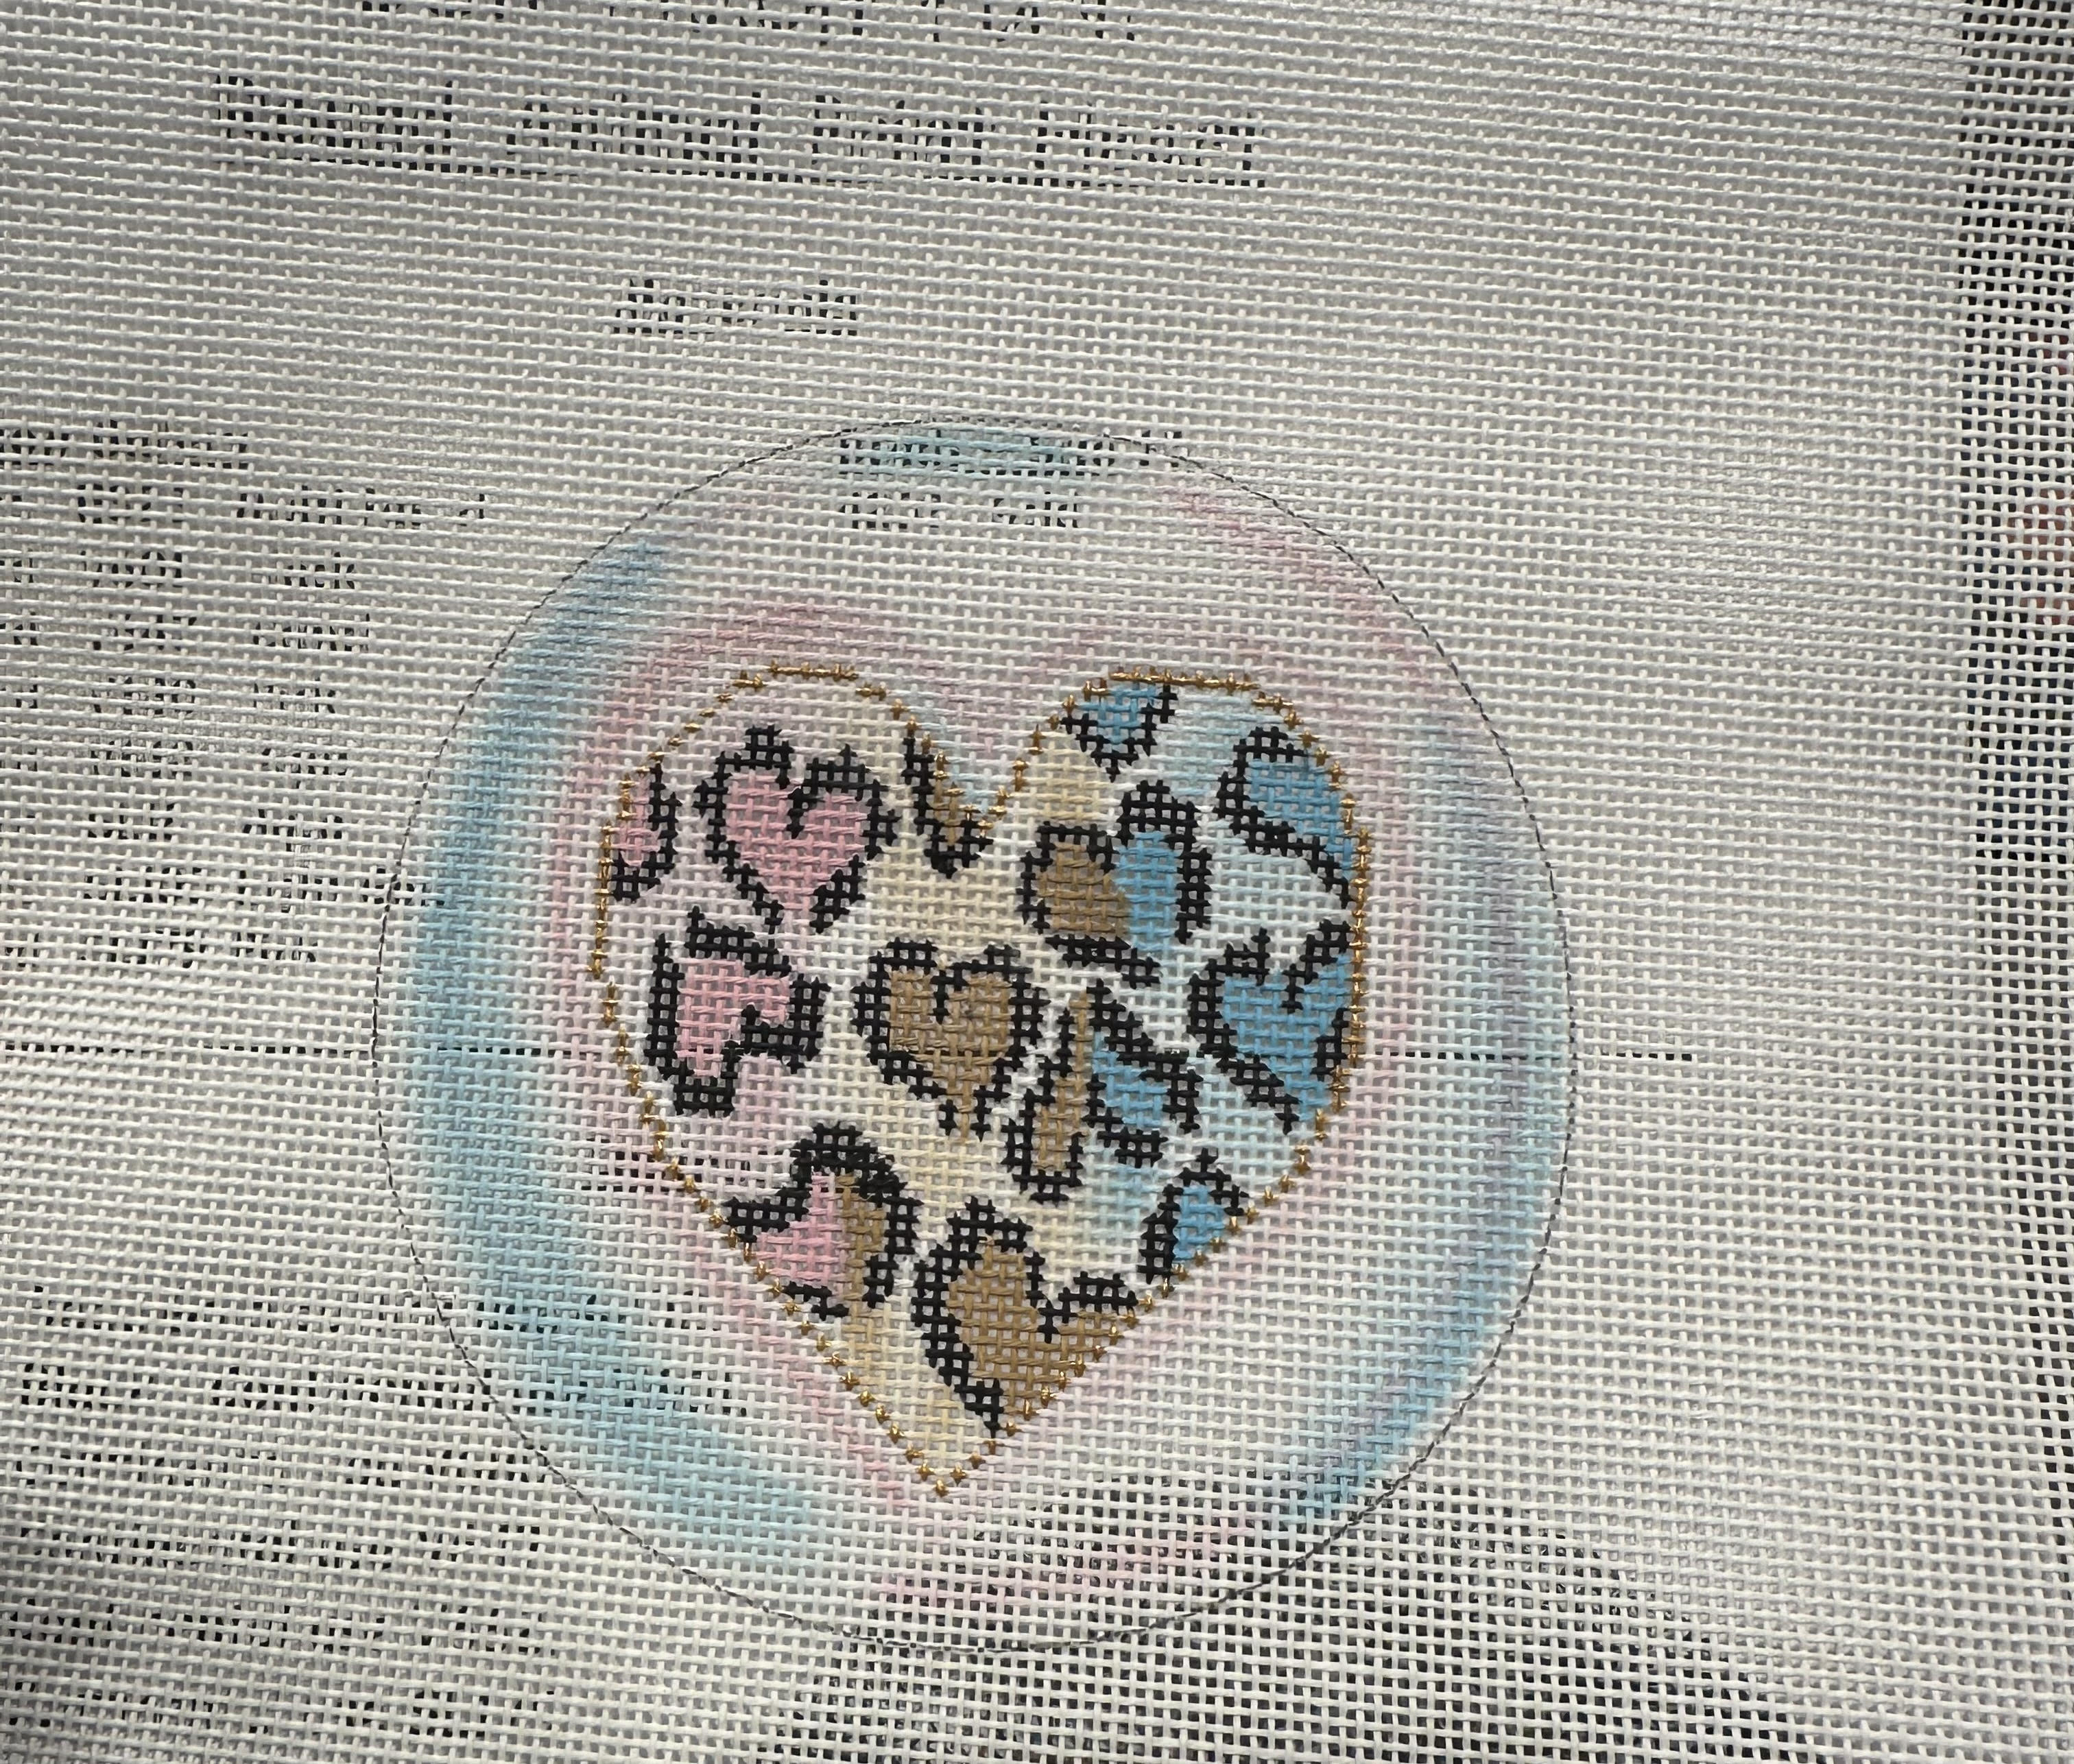 Sew Much Fun Round Animal Print Heart with Stitch Guide